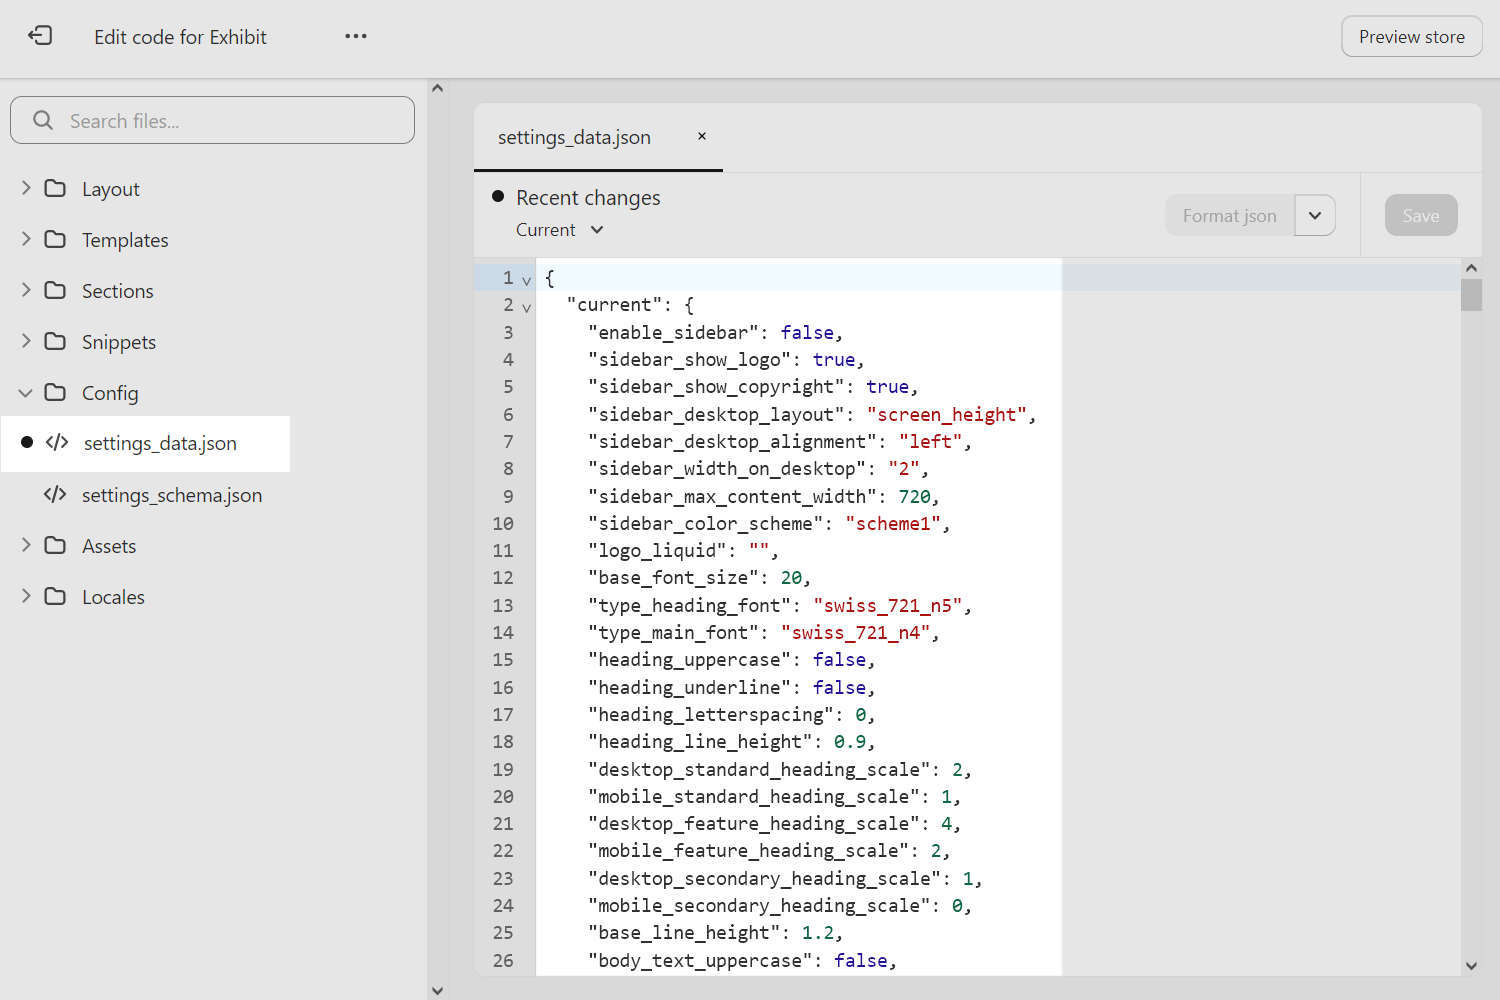 Screenshot of a theme's settings data JSON file open in the Shopify theme code editor.